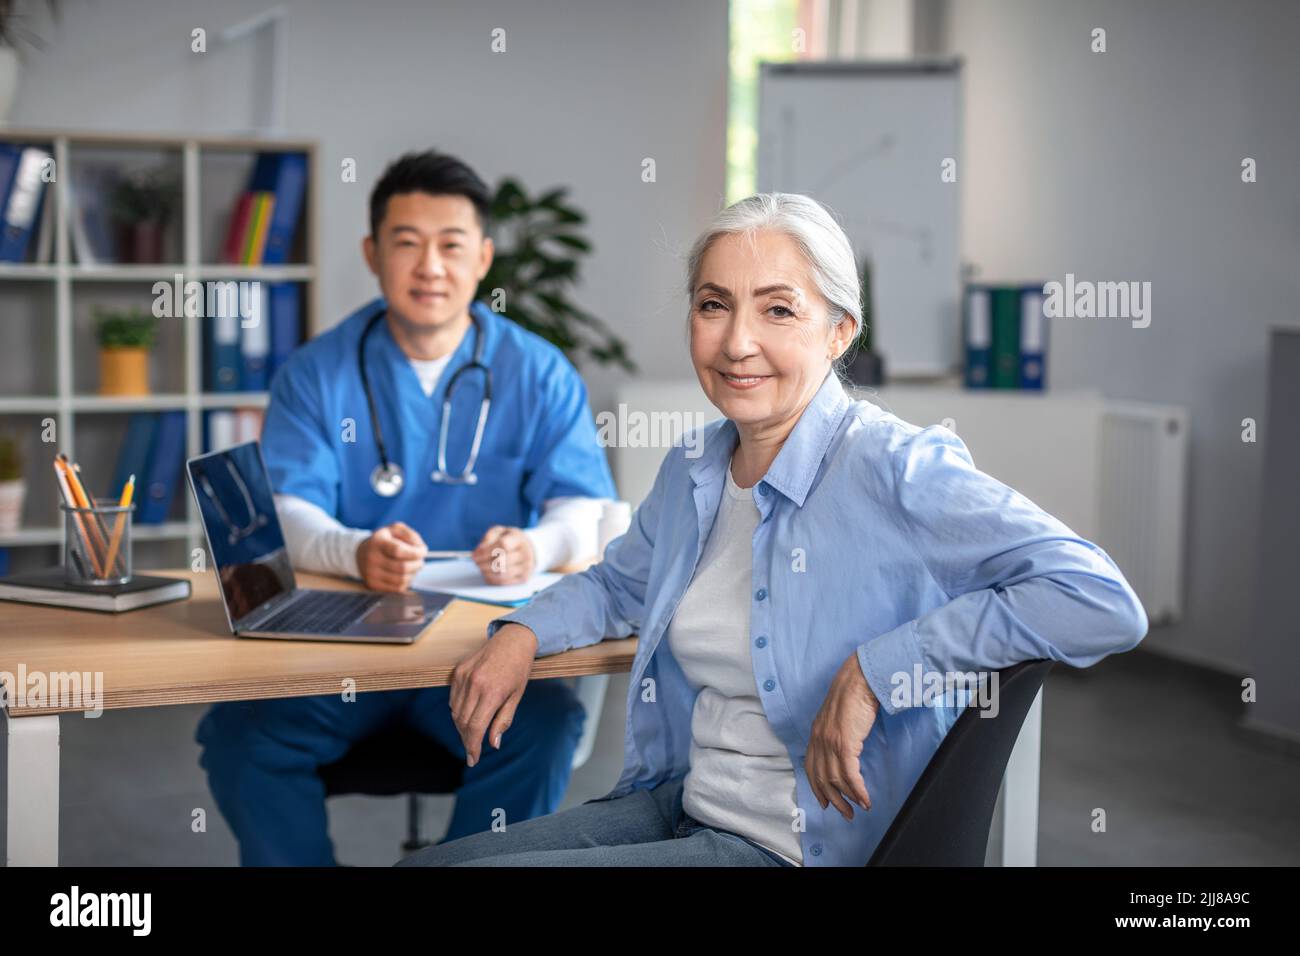 Smiling elderly european woman patient on meeting with young asian doctor in uniform look at camera Stock Photo